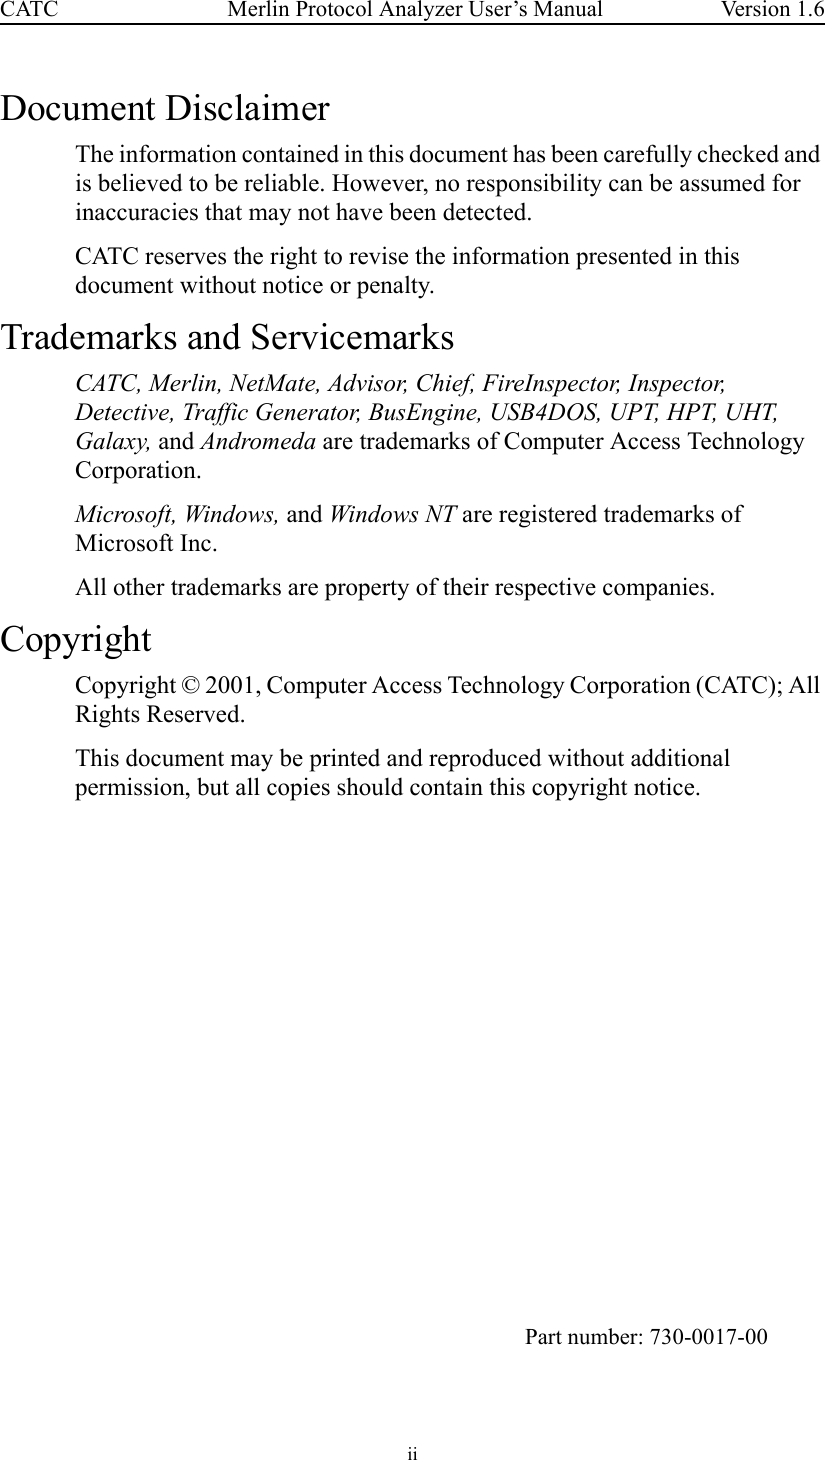 ii Merlin Protocol Analyzer User’s ManualCATC Version 1.6Document DisclaimerThe information contained in this document has been carefully checked and is believed to be reliable. However, no responsibility can be assumed for inaccuracies that may not have been detected.CATC reserves the right to revise the information presented in this document without notice or penalty.Trademarks and ServicemarksCATC, Merlin, NetMate, Advisor, Chief, FireInspector, Inspector, Detective, Traffic Generator, BusEngine, USB4DOS, UPT, HPT, UHT, Galaxy, and Andromeda are trademarks of Computer Access Technology Corporation. Microsoft, Windows, and Windows NT are registered trademarks of Microsoft Inc.All other trademarks are property of their respective companies.CopyrightCopyright © 2001, Computer Access Technology Corporation (CATC); All Rights Reserved.This document may be printed and reproduced without additional permission, but all copies should contain this copyright notice. Part number: 730-0017-00